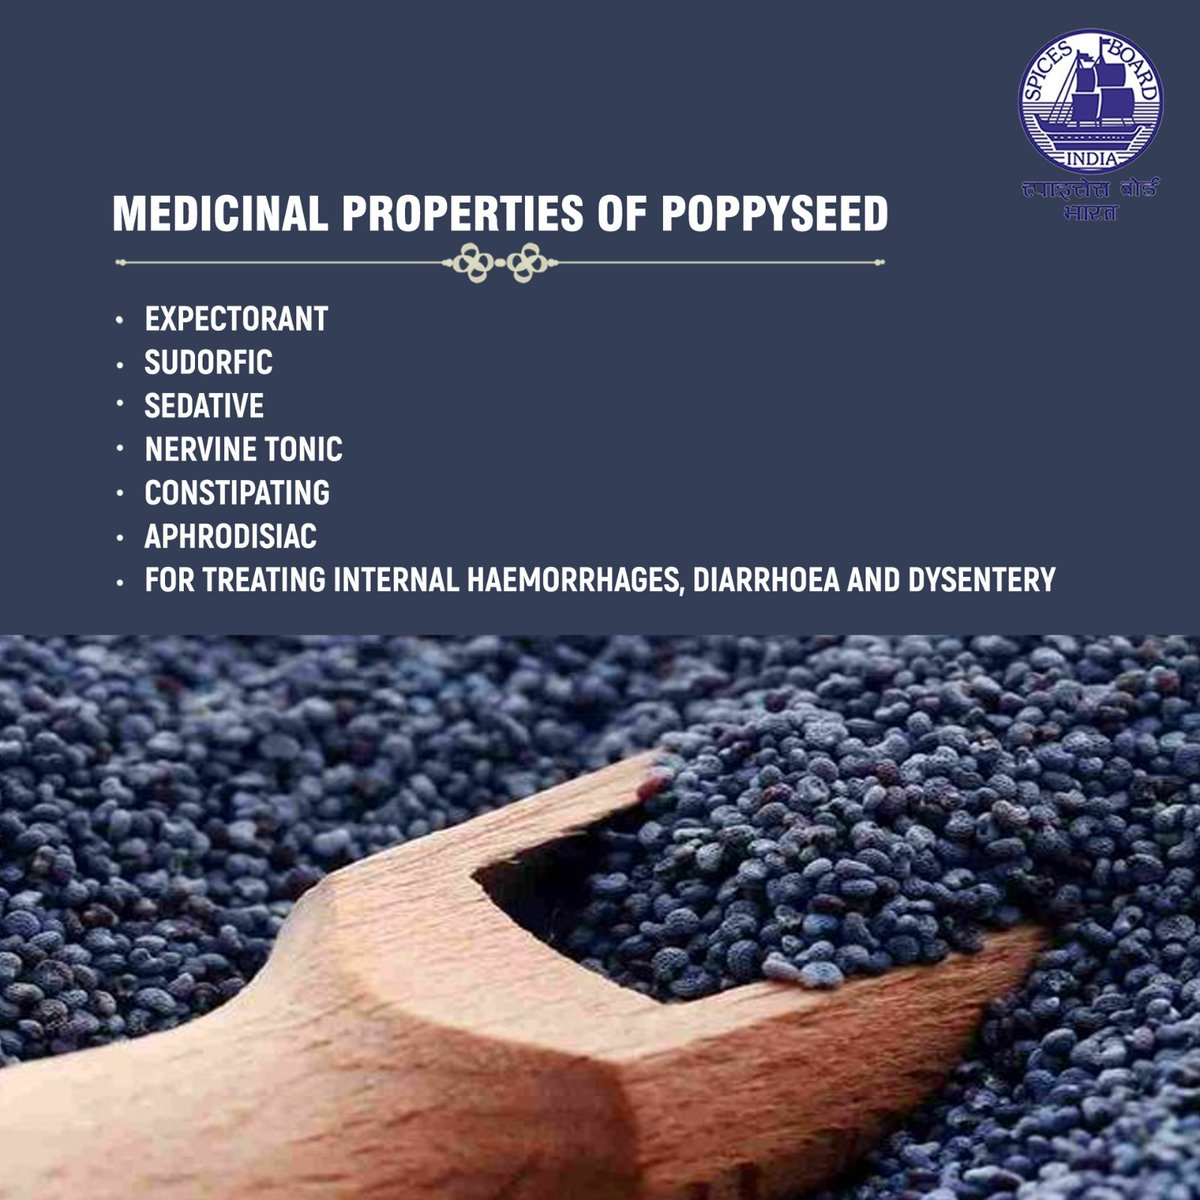 Explore the wonders of this tiny powerhouse @doc_goi #spicesboard #poppyseed #incrediblespicesofindia